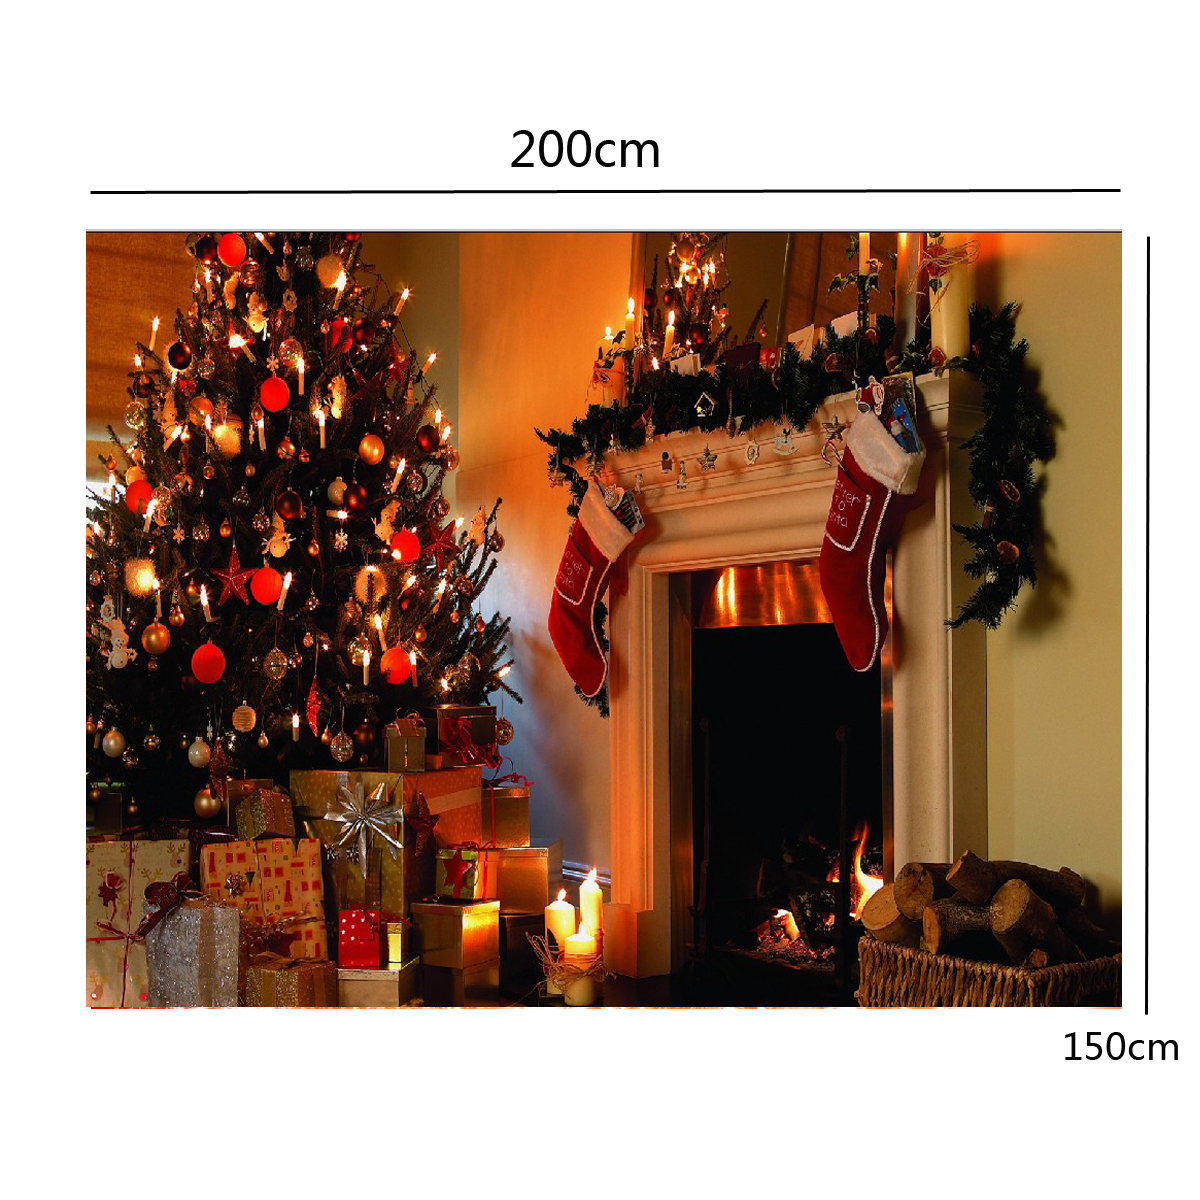 152m-Fireplace-Christmas-Photography-Background-Cloth-Backdrops-Decoration-Toys-1338653-5